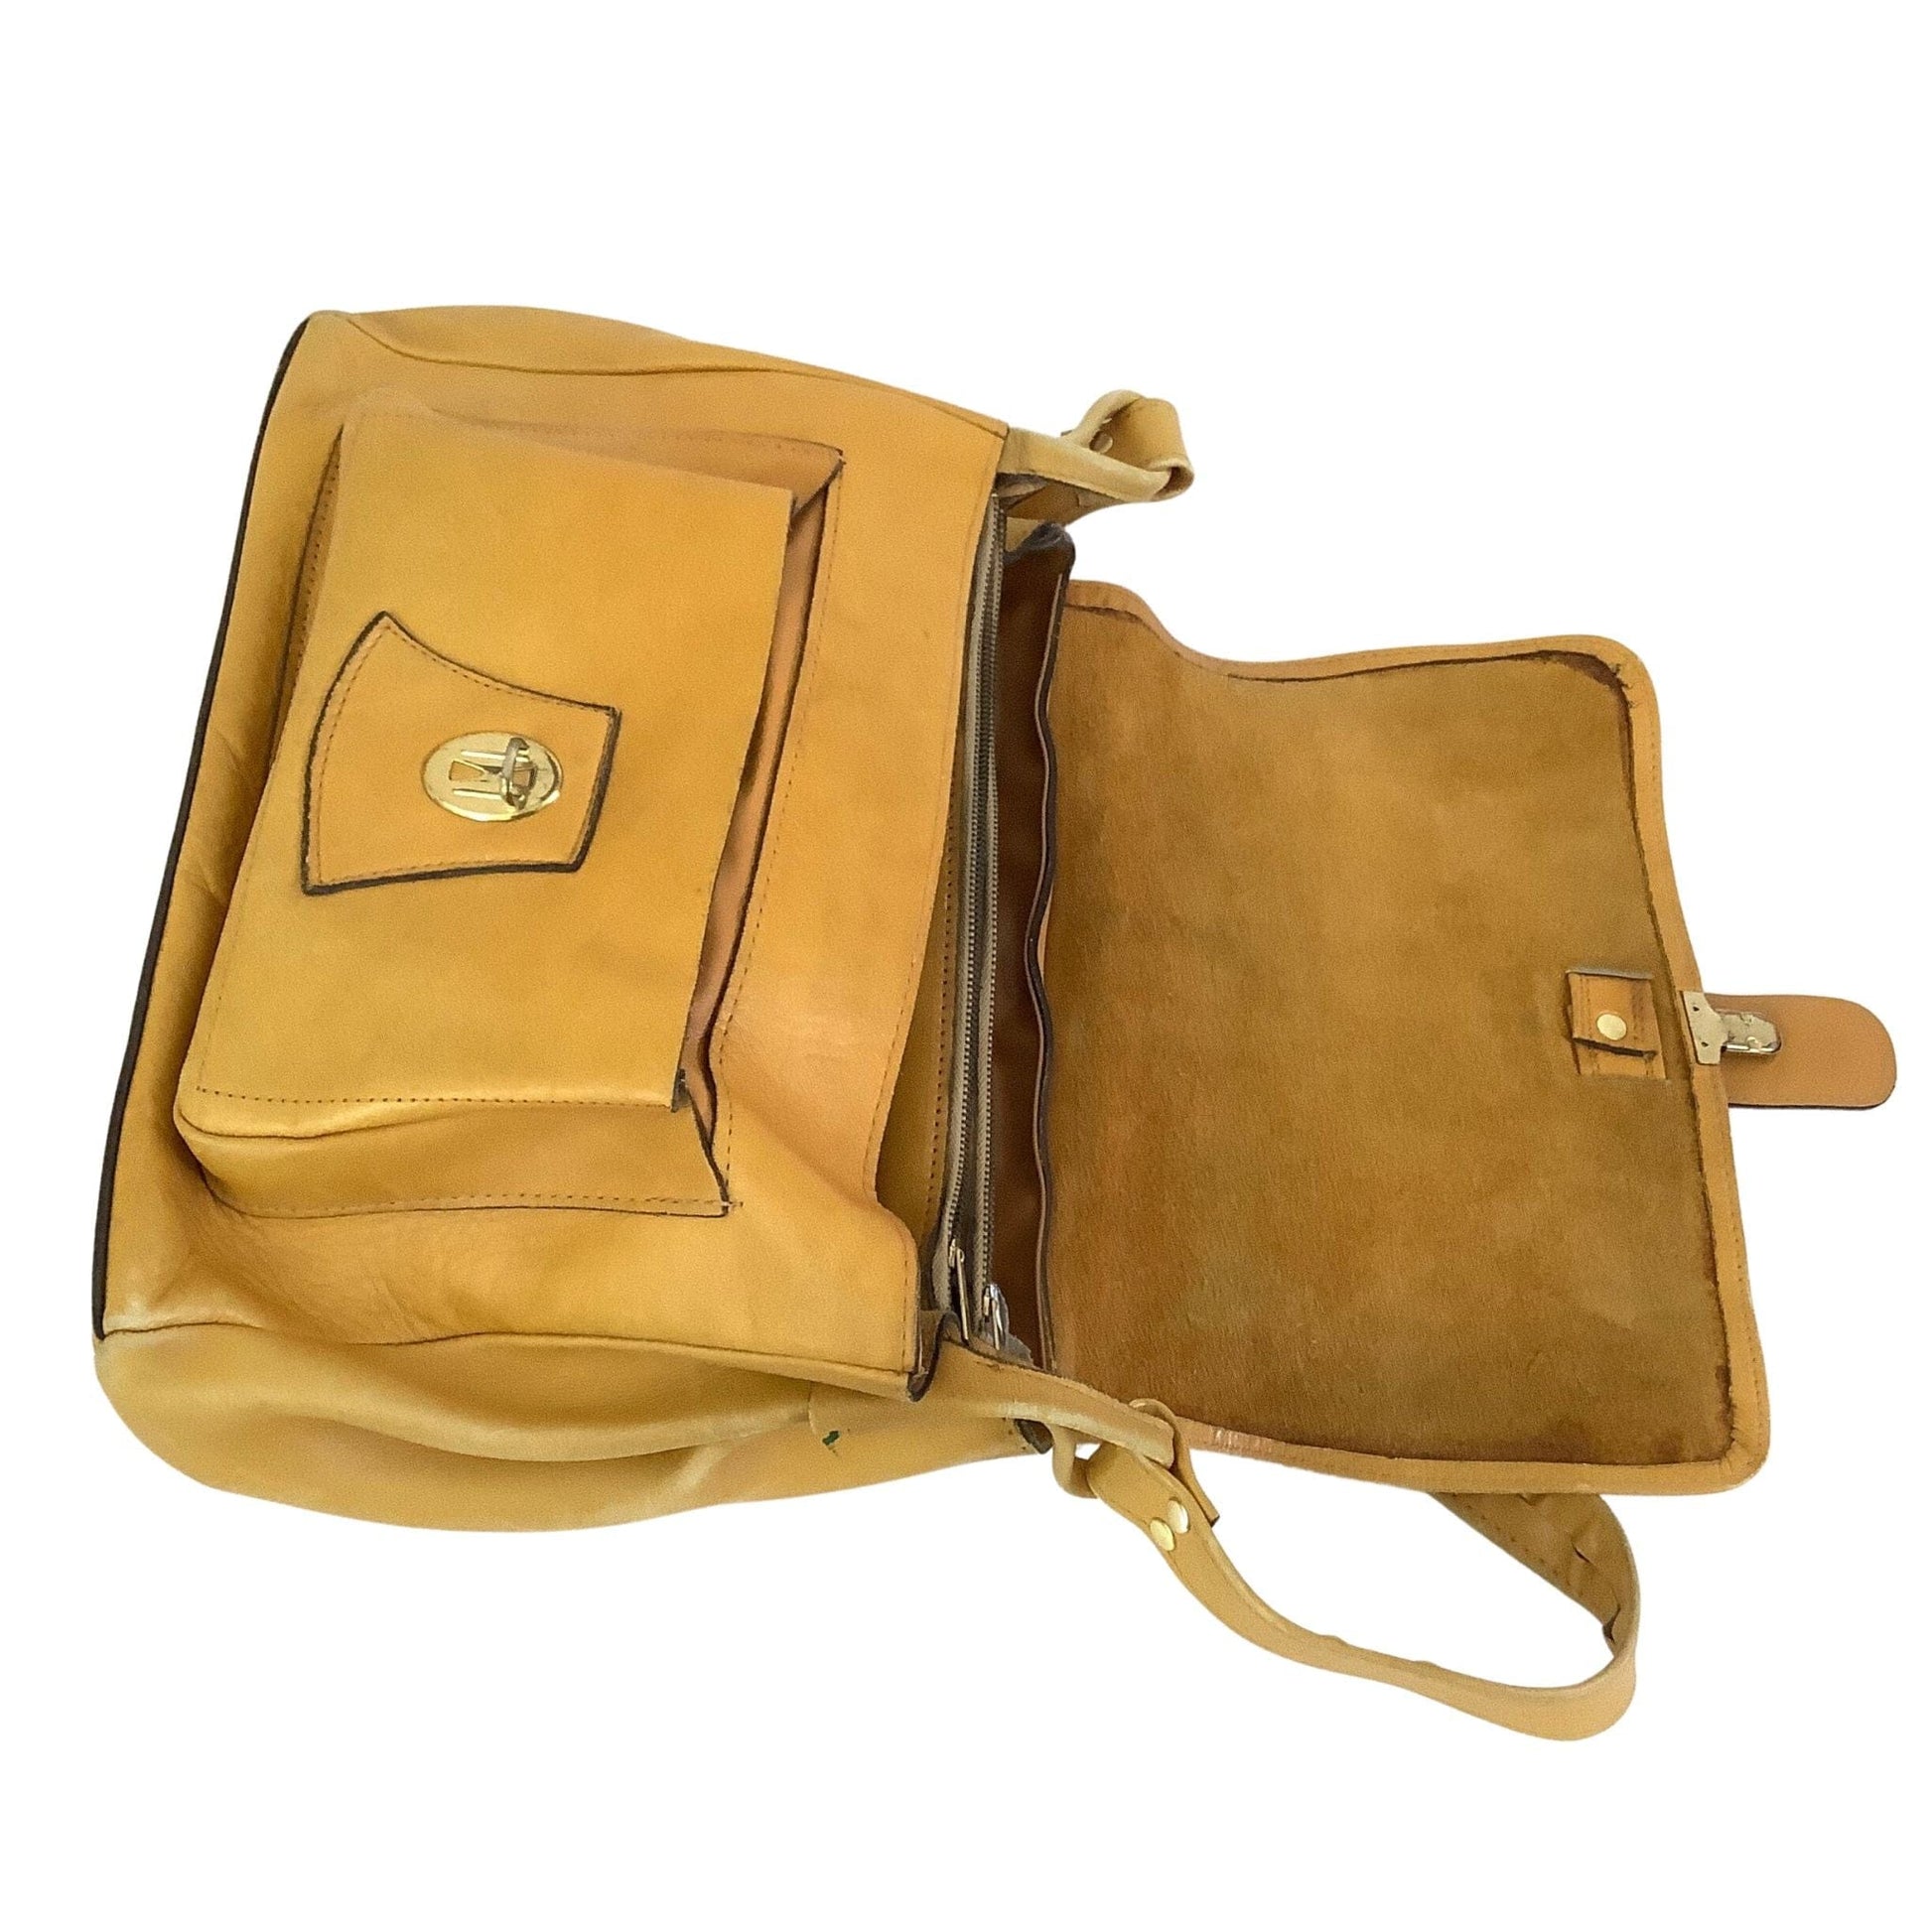 1960s Western Leather Bag Yellow / Leather / Vintage 1980s